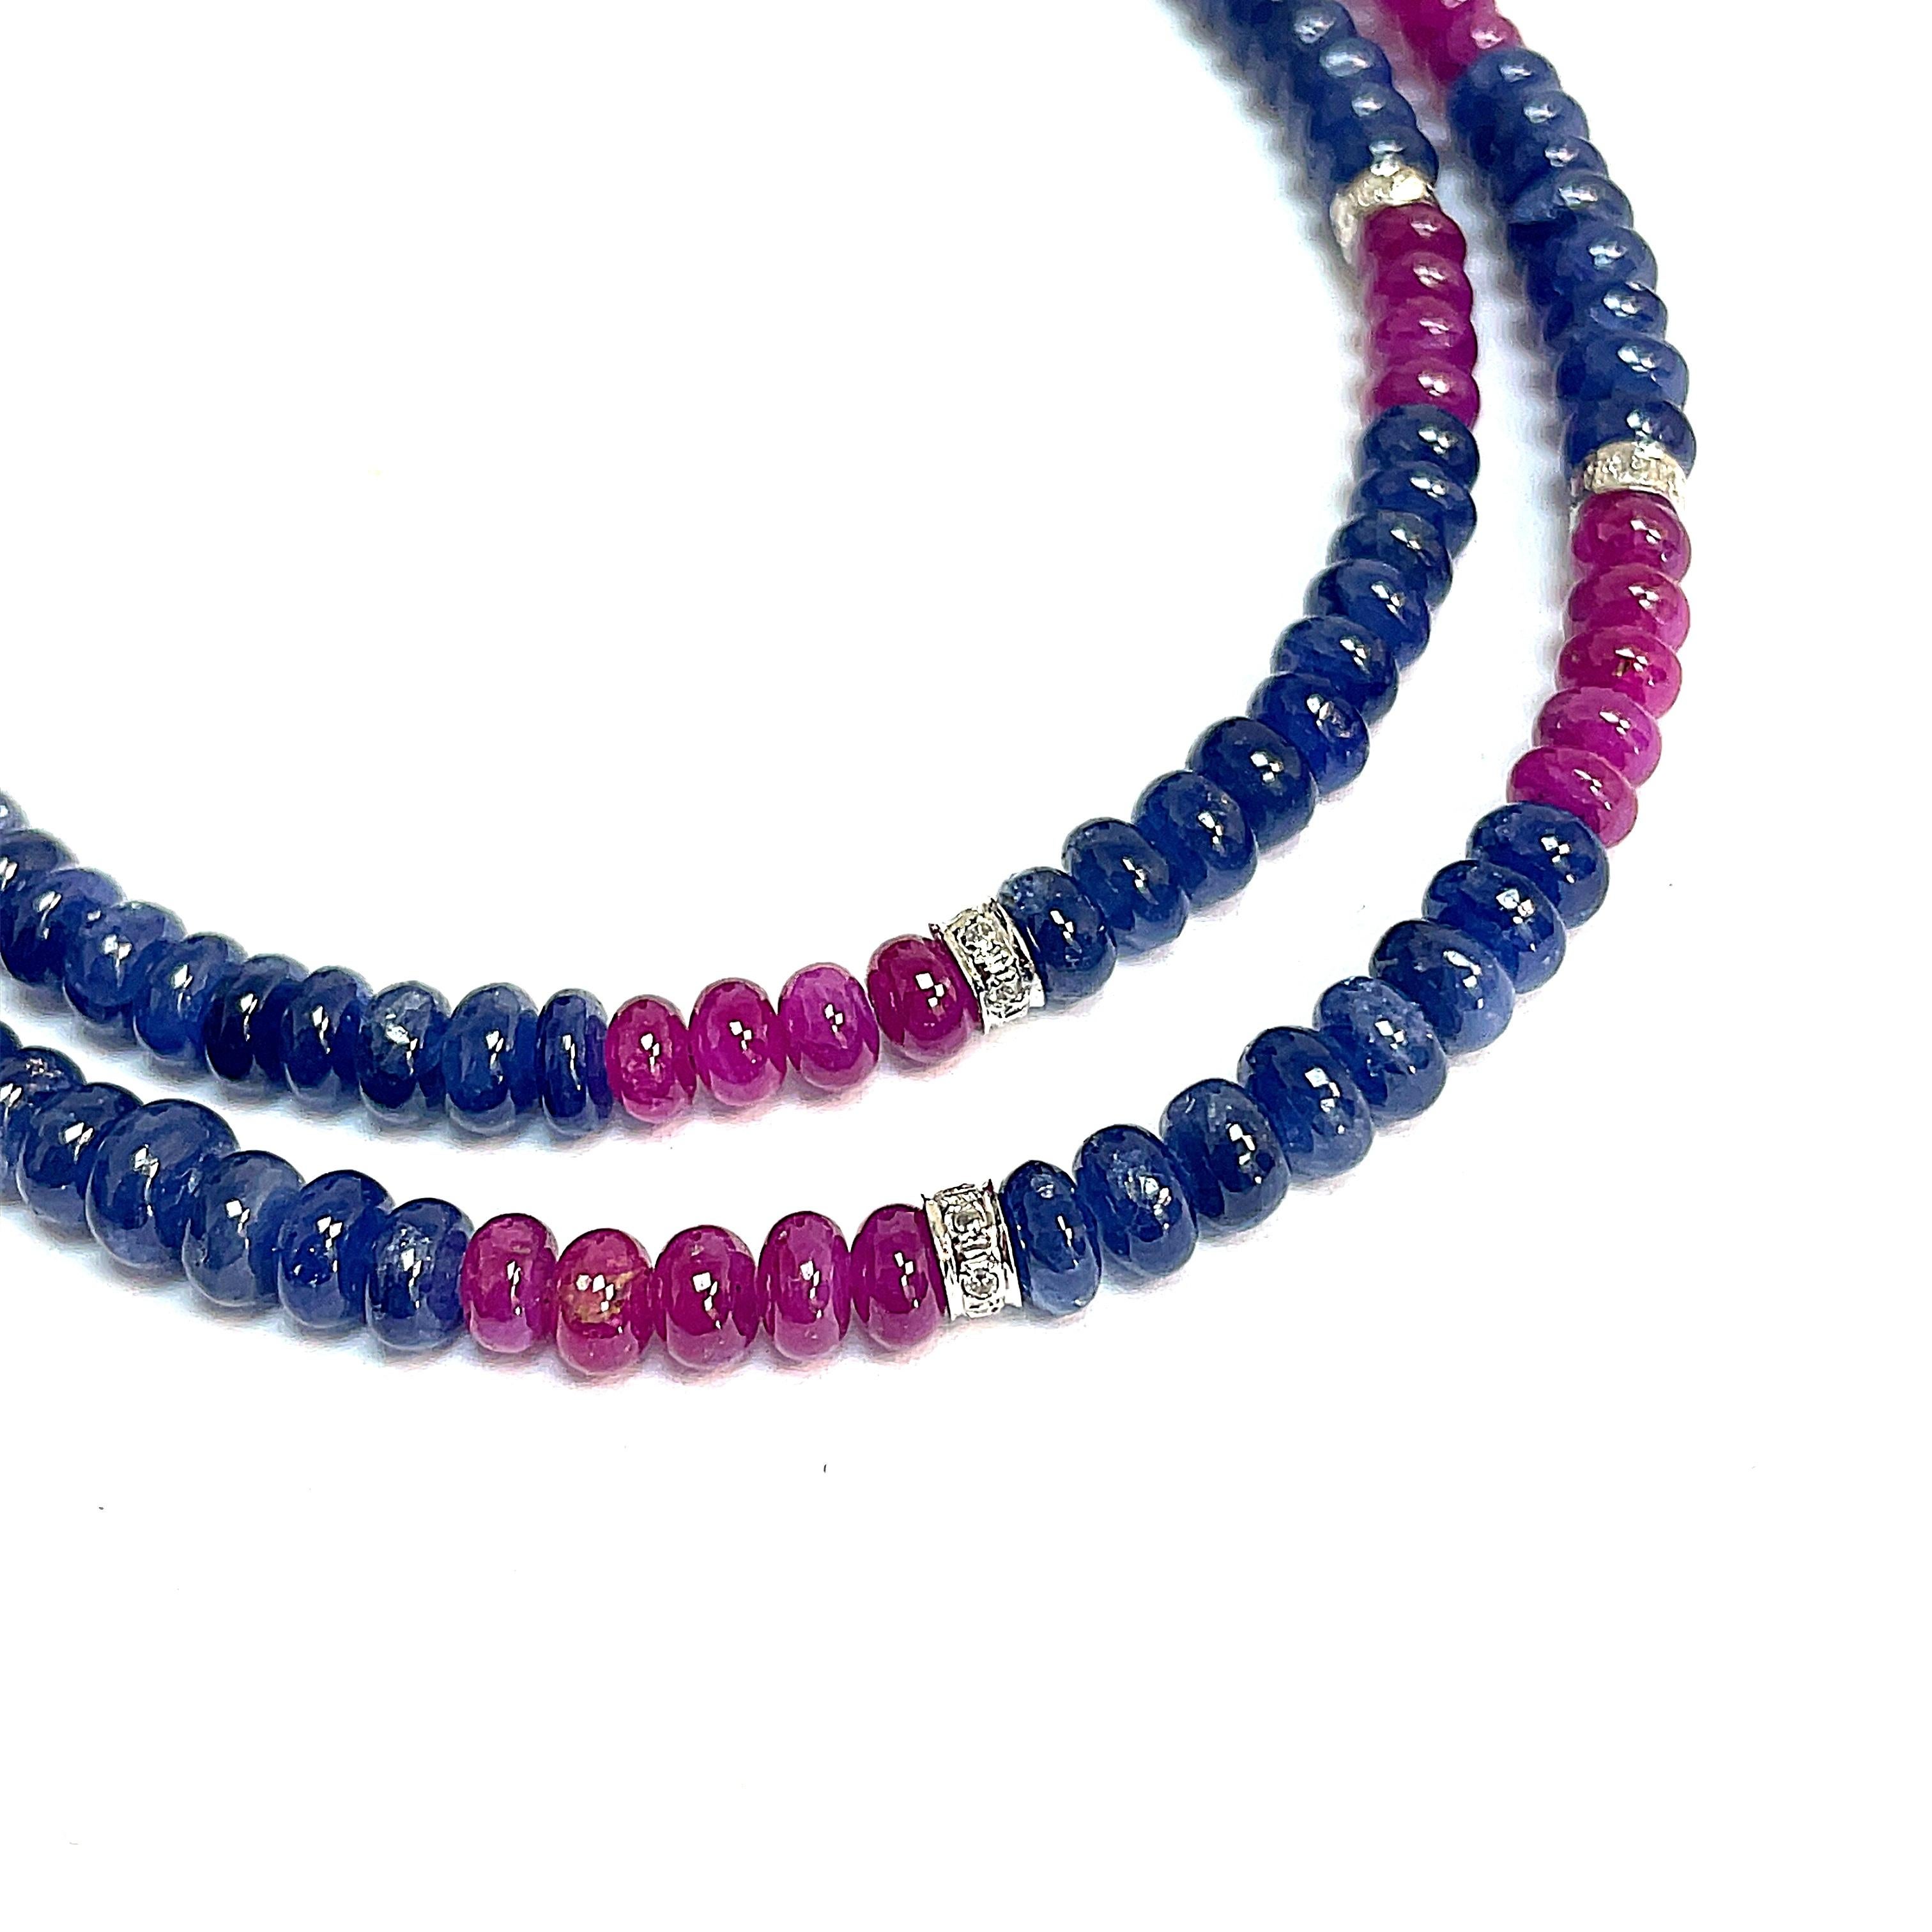 Burmese Ruby and Sapphire Beads White Diamond Gold Necklace For Sale 1